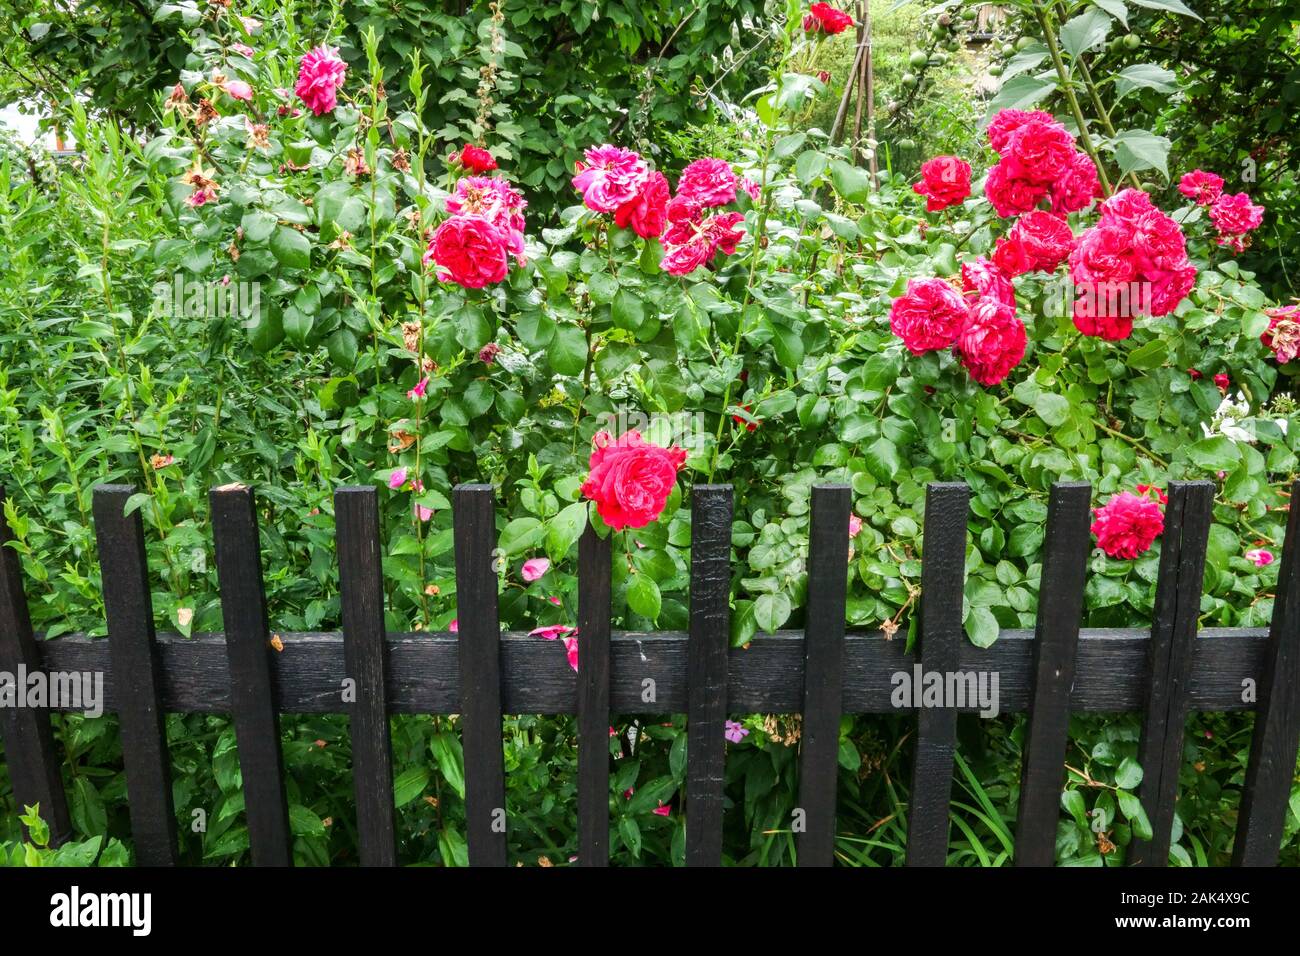 Garden fence red roses Stock Photo